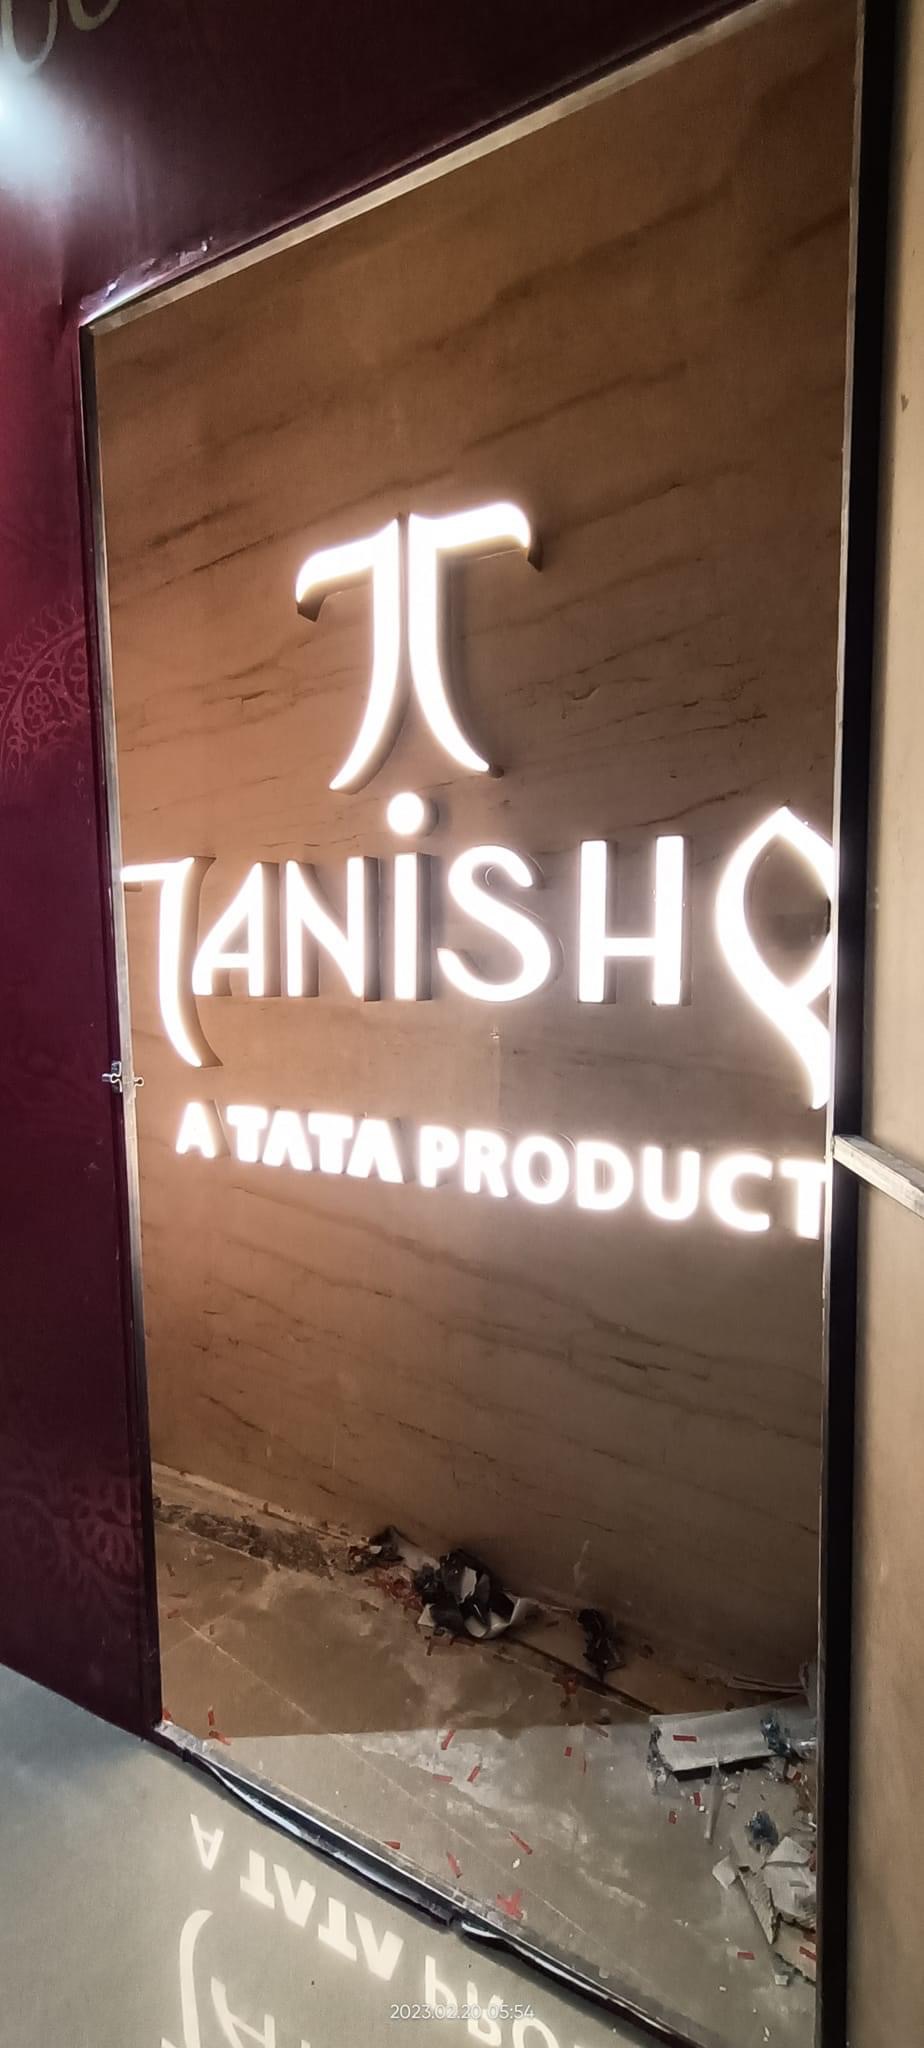 Tanishq launches exclusive collection of 'Lumba Rakhis' - MediaBrief